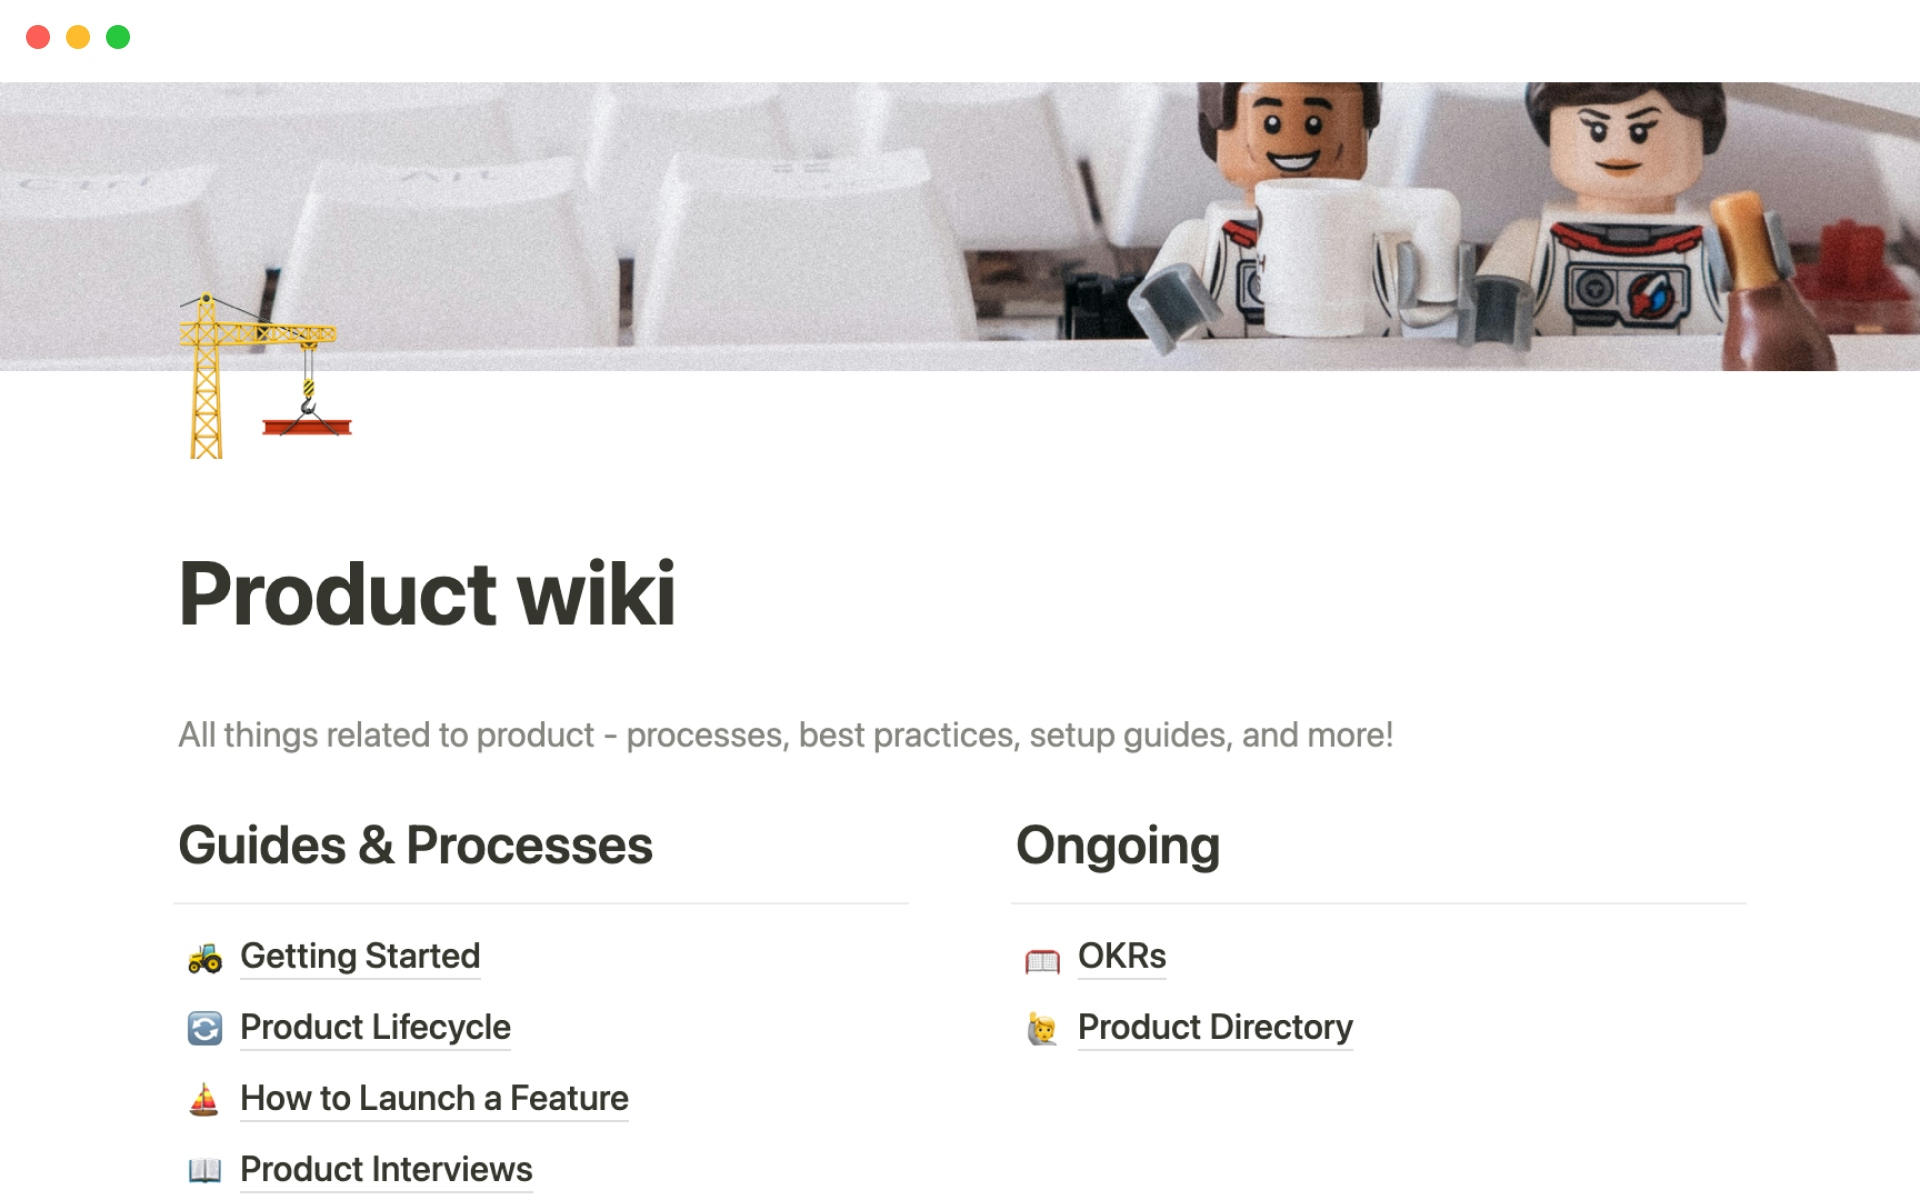 The desktop image for the Product wiki template